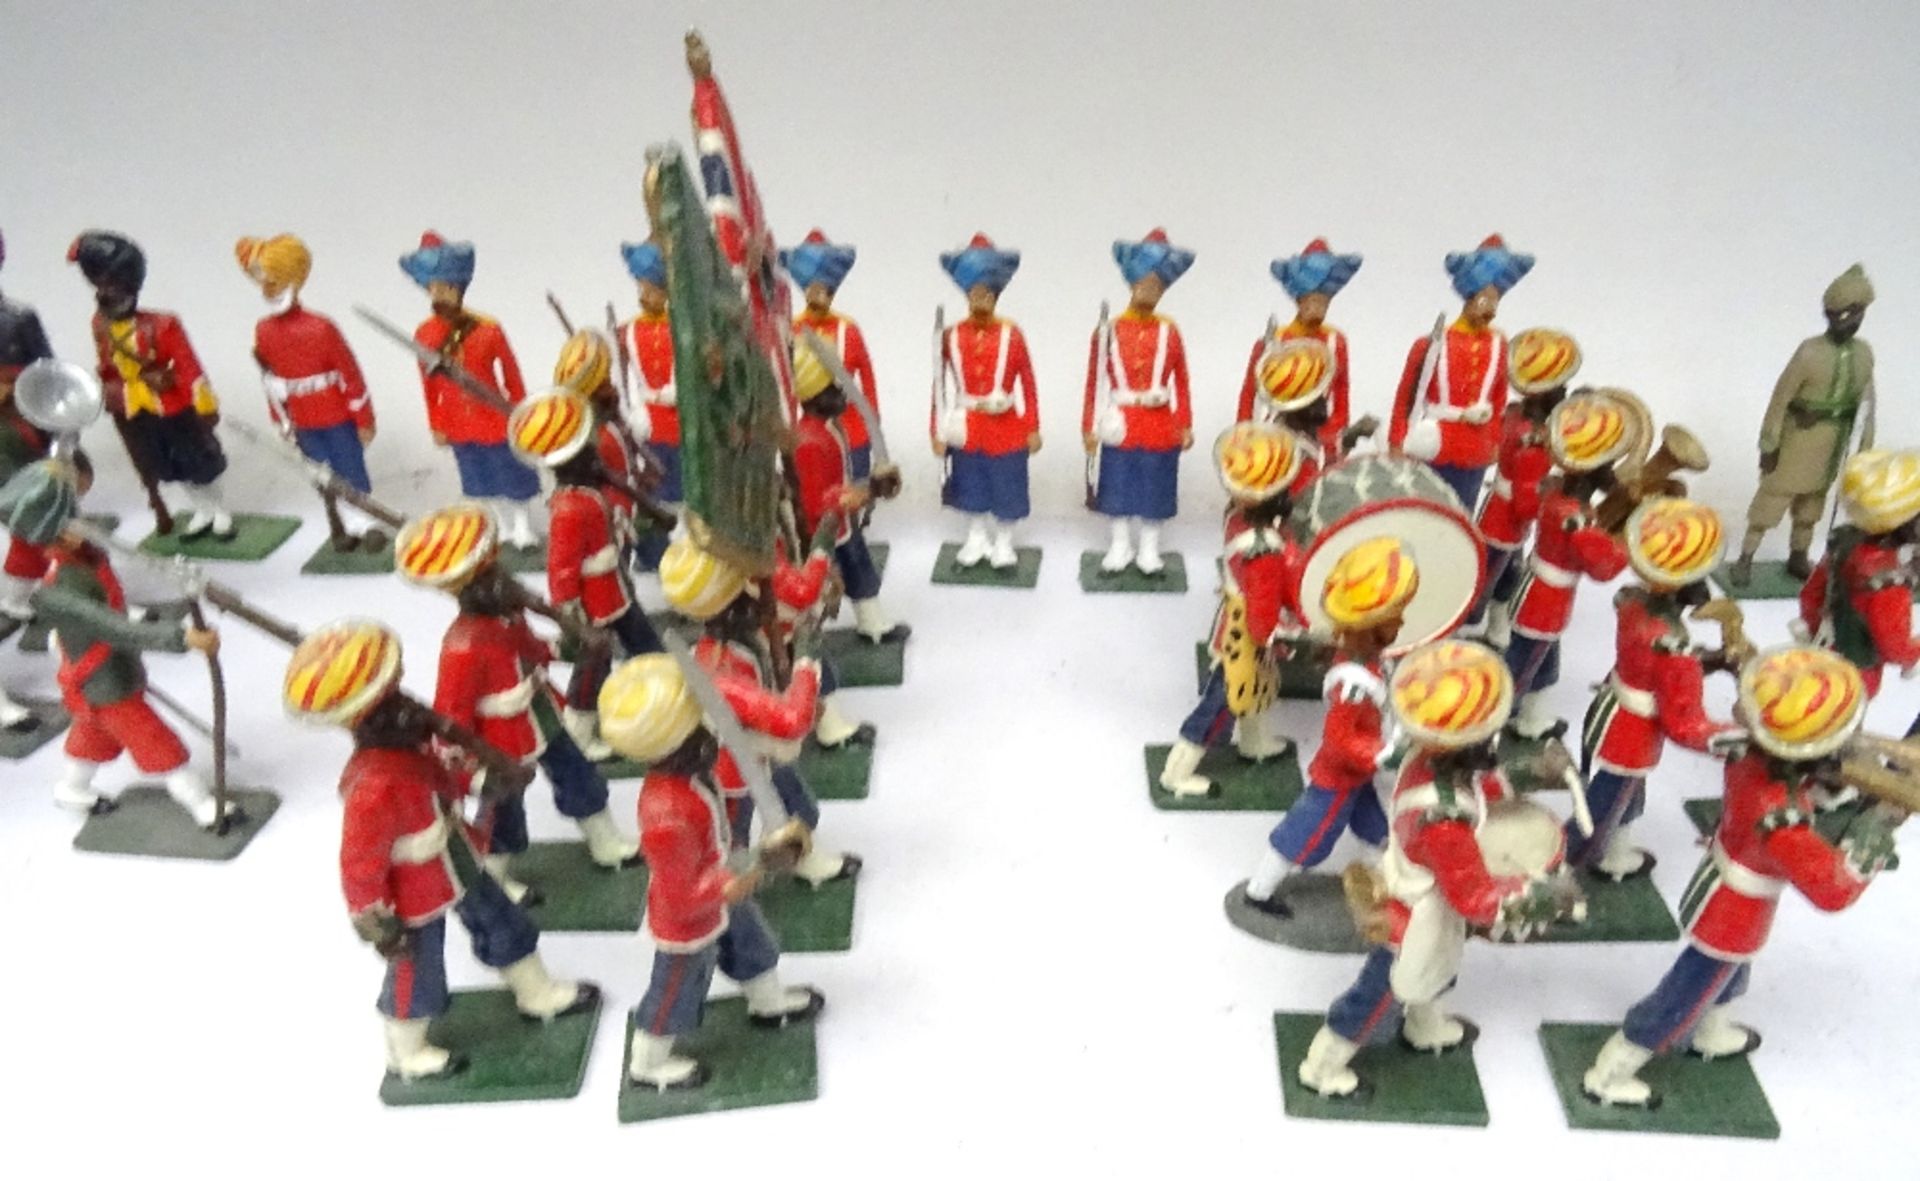 British Indian Army by various New Toy Soldier Makers - Image 8 of 13